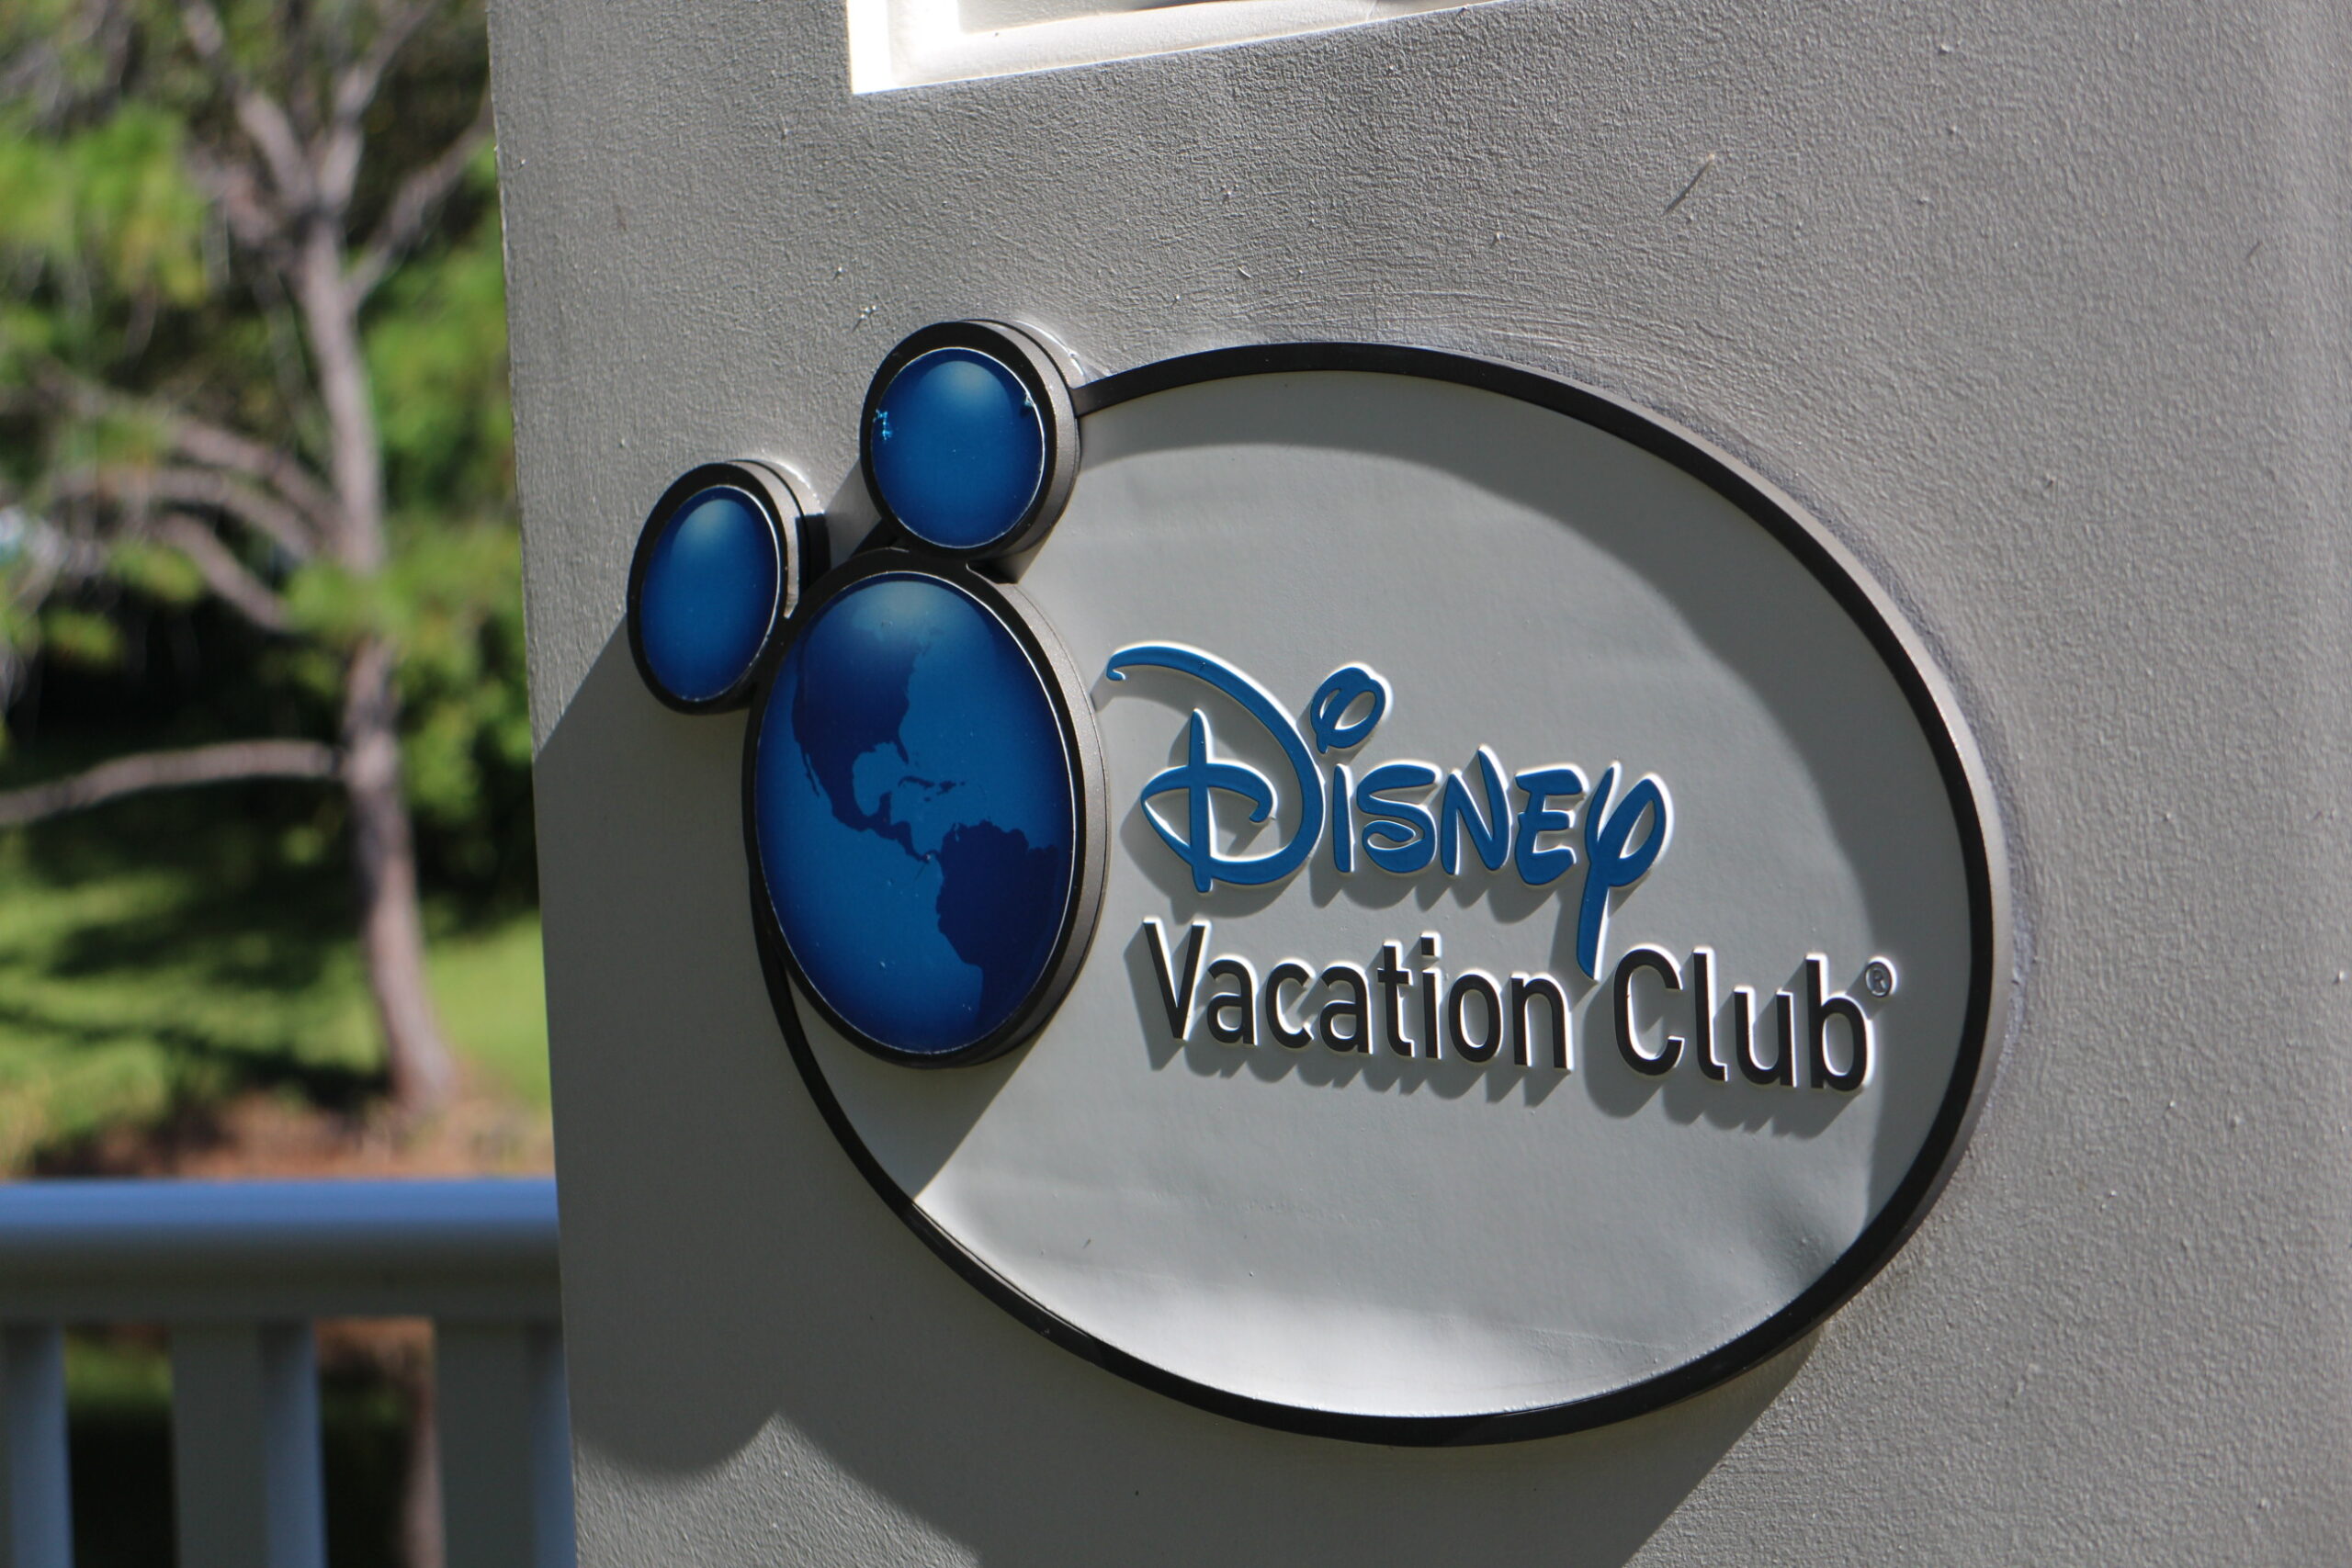 white Disney Vacation Club emblem with globe logo on a wall outdoors